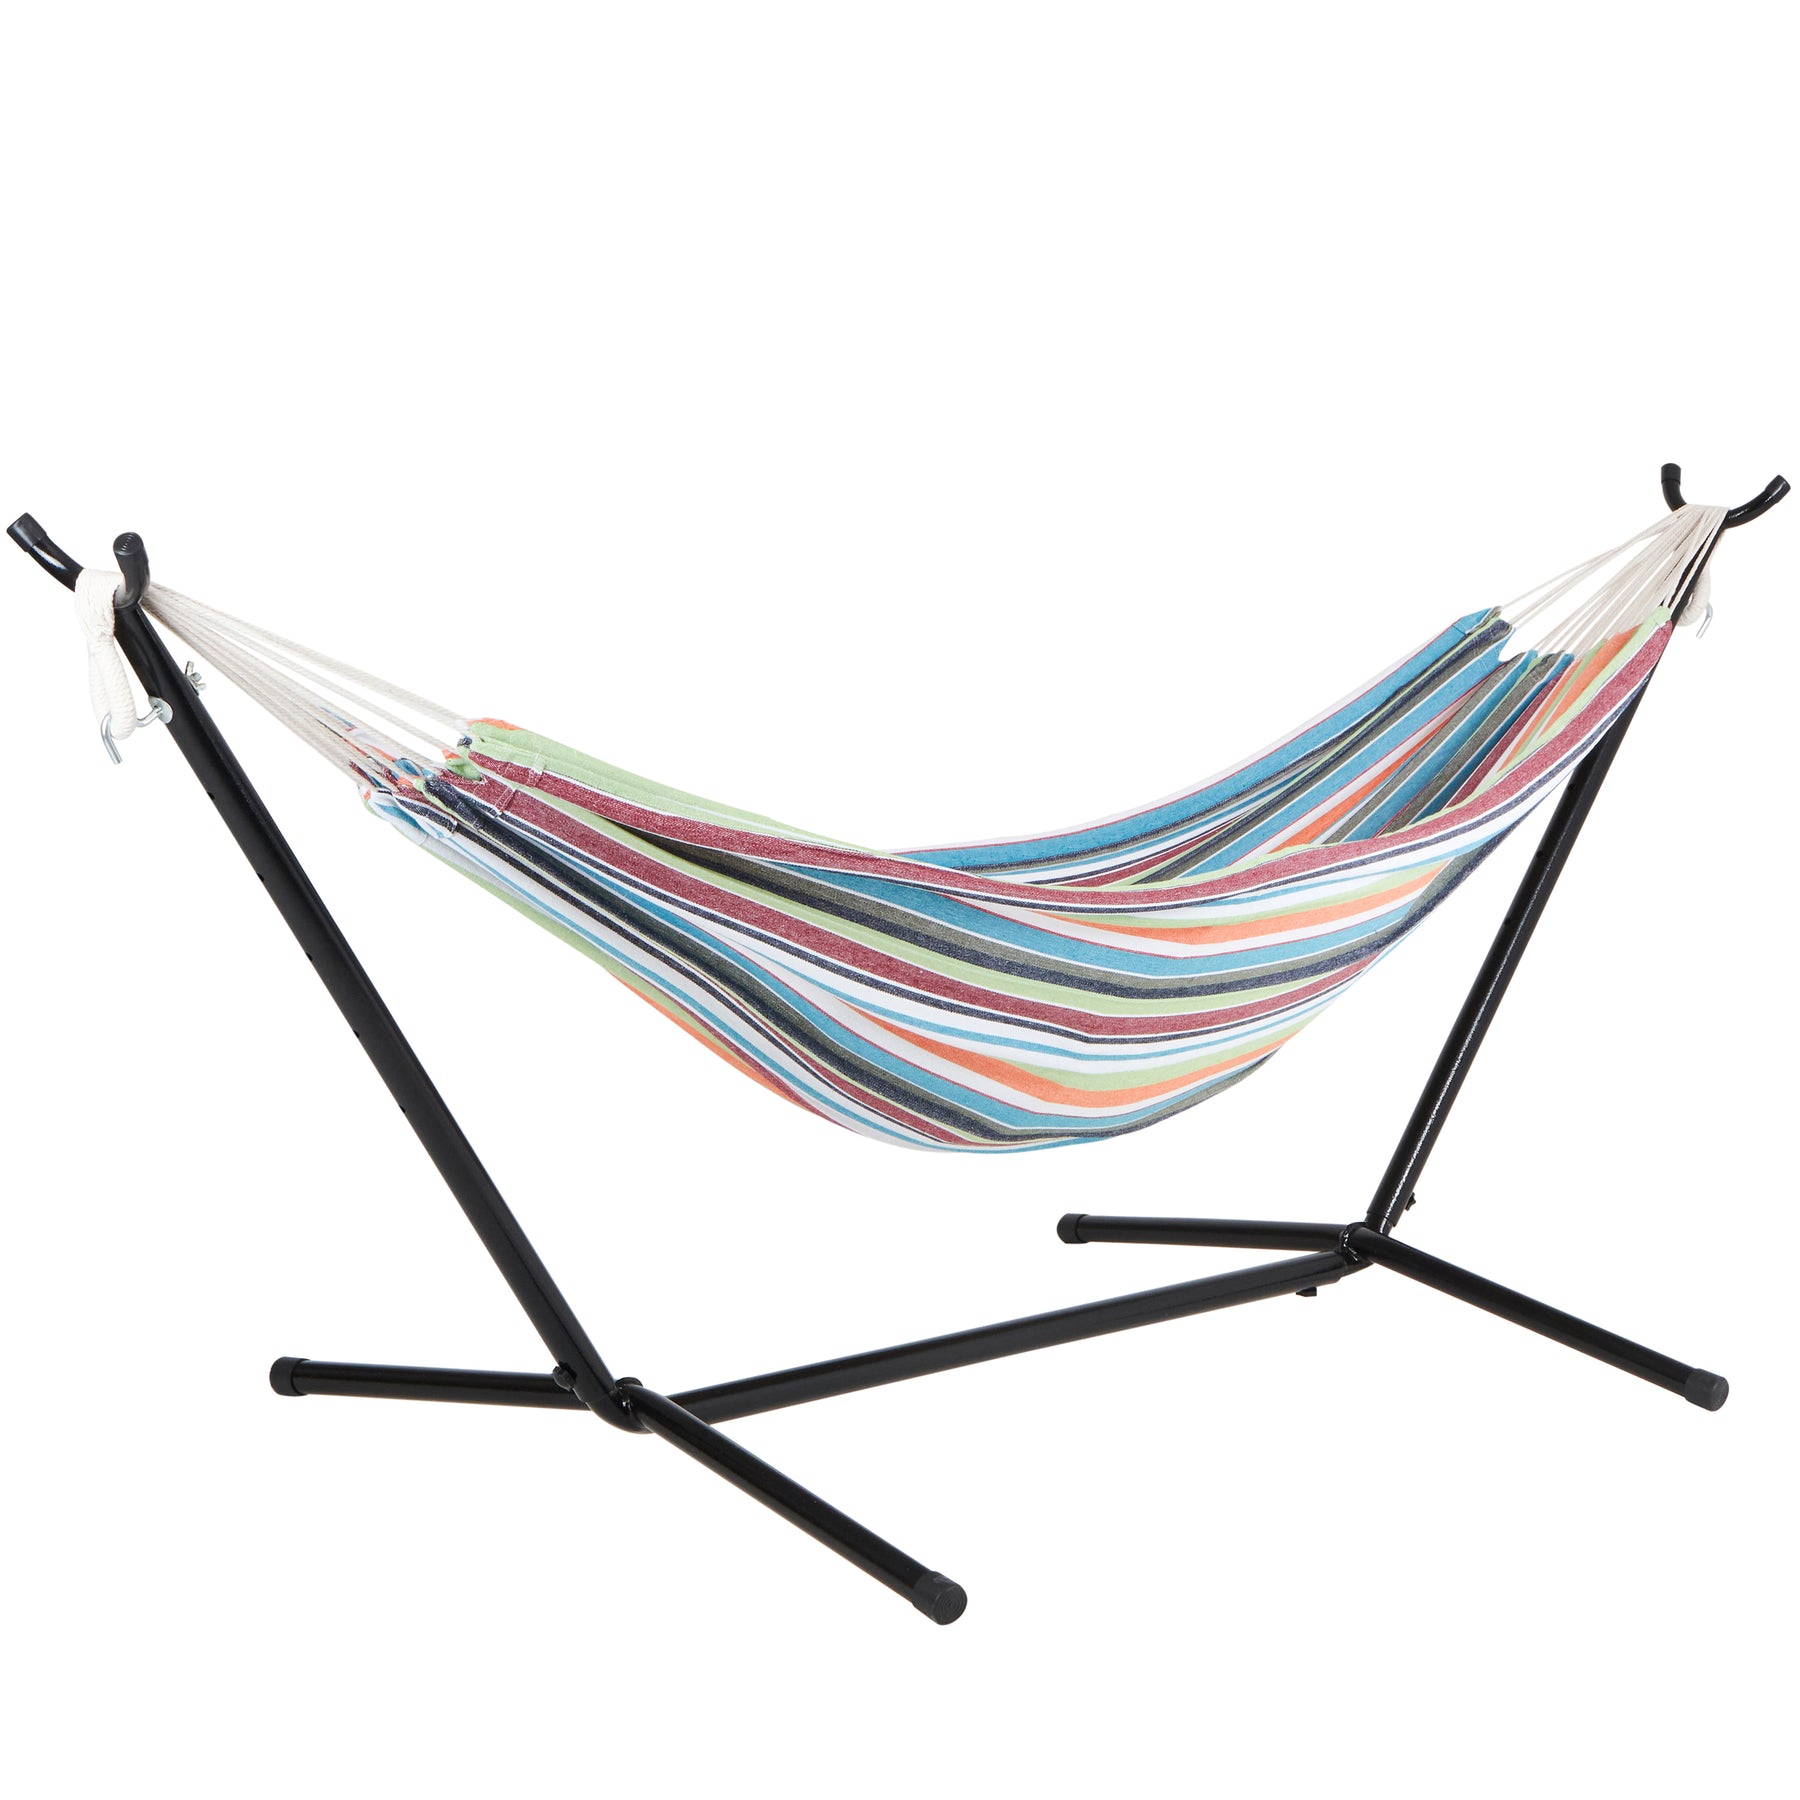 Bliss Hammocks 60-inch Wide Hammock & Built-in Stand in the Tropical Fruit variation, which are stripes of red, blue, orange, black, gray, white, and green.